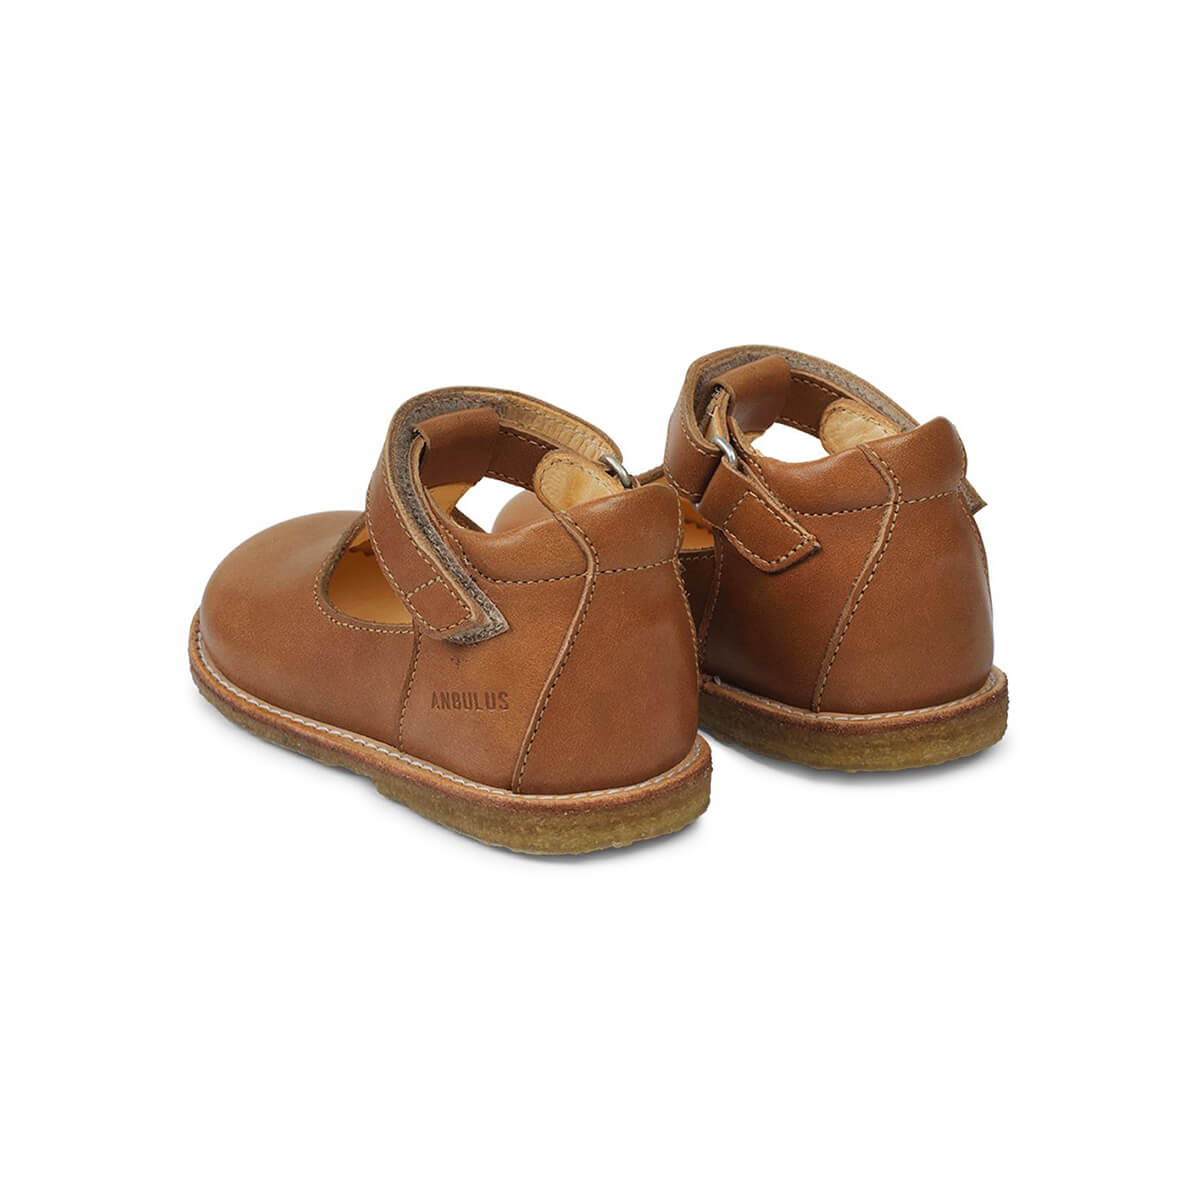 Heart T Bar Starter Janes in Tan by Angulus – Junior Edition